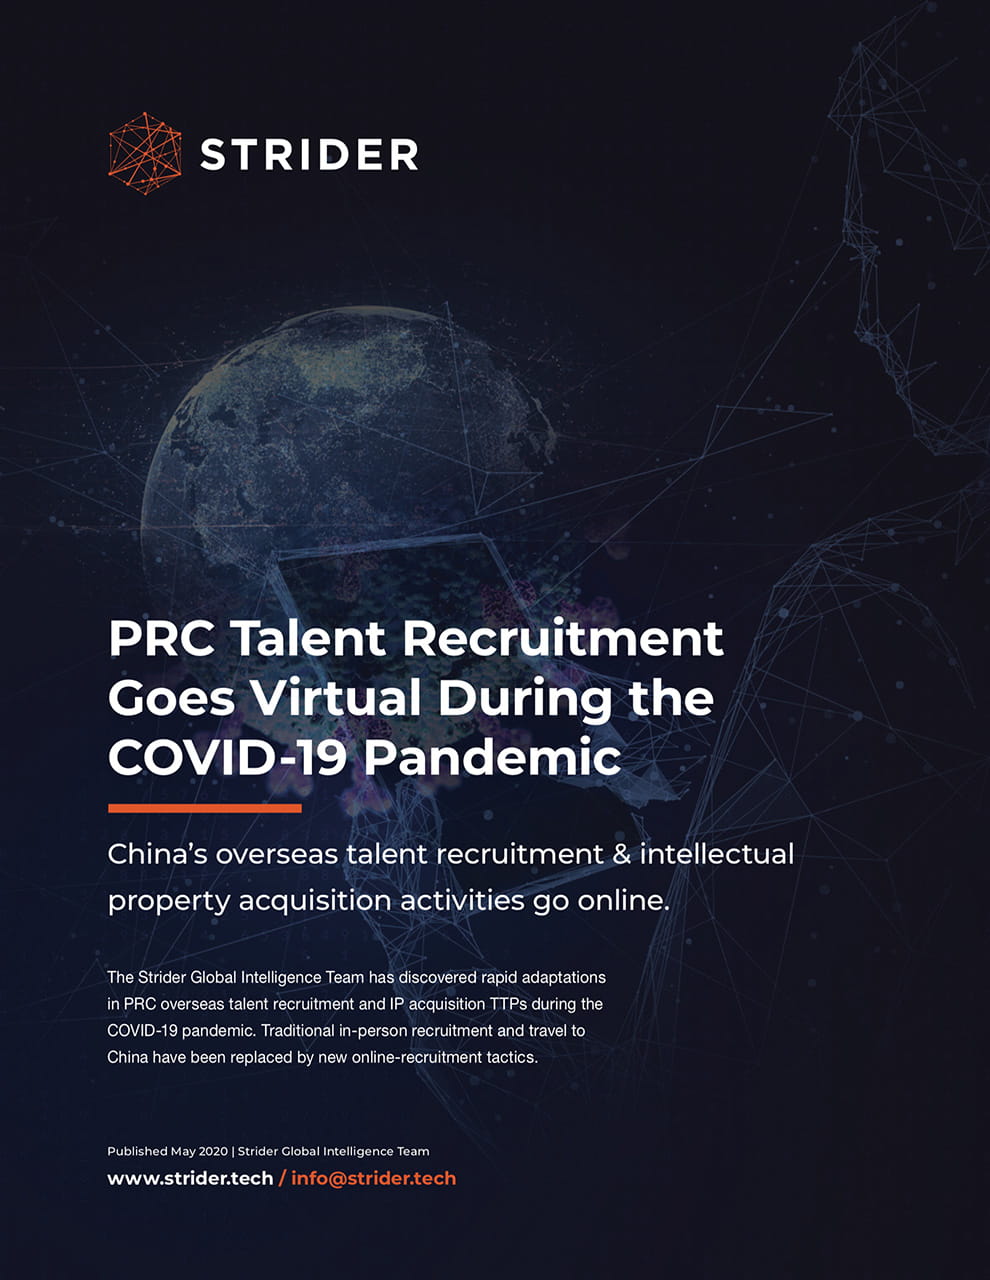 Strider PRC Recruitment Goes Virtual During COVID-19 Pandemic Report Cover